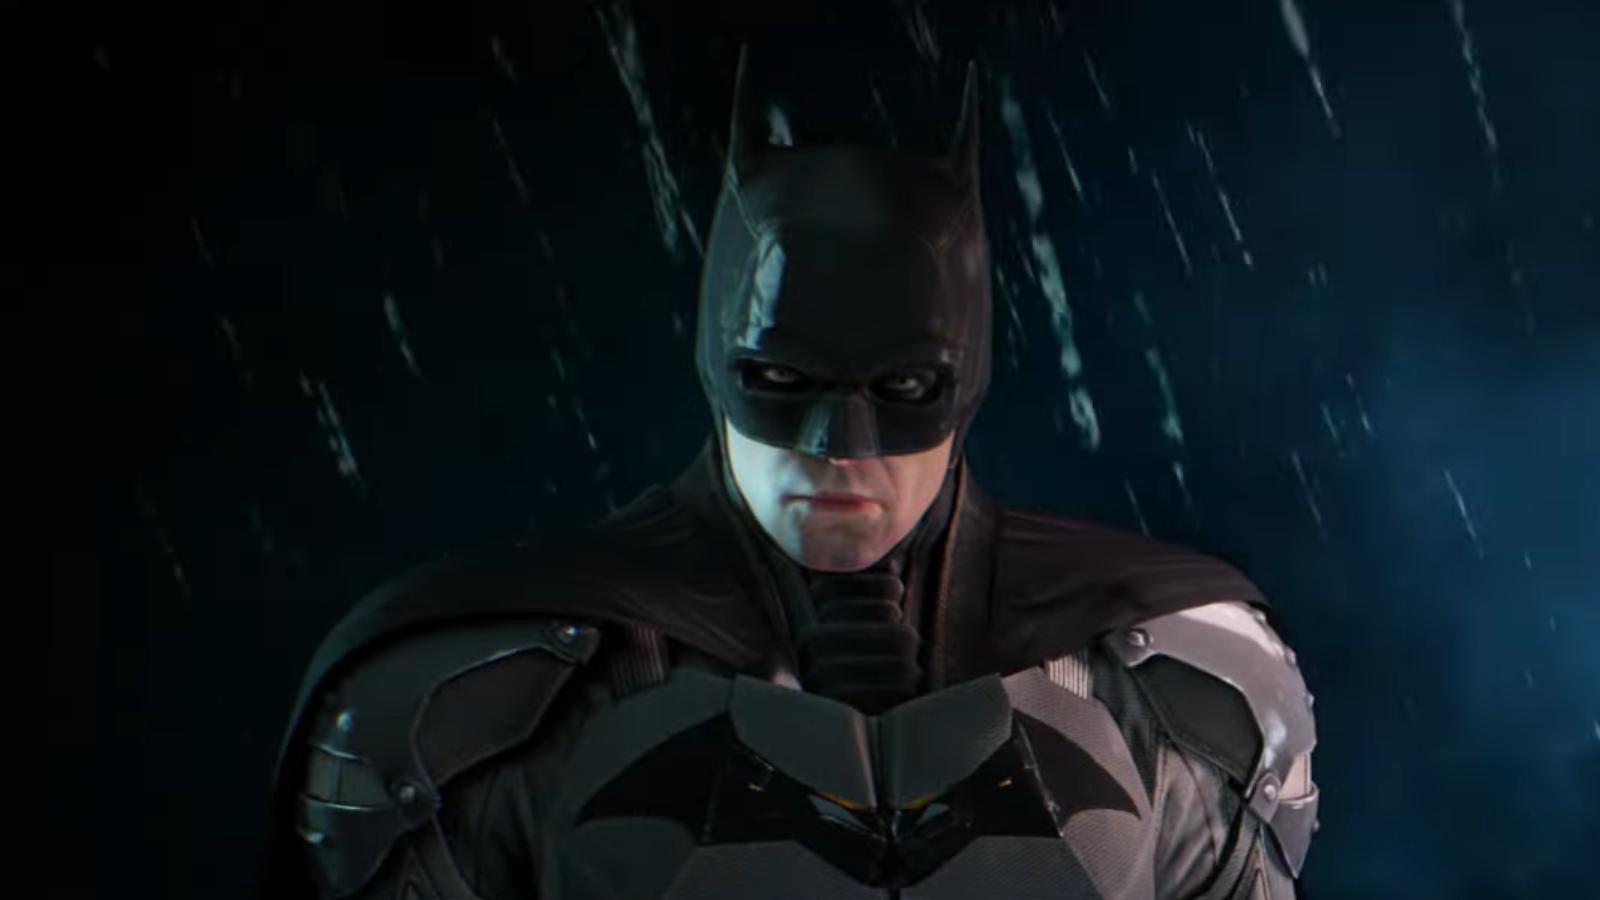 Batman: Arkham Trilogy Coming to Nintendo Switch This Fall